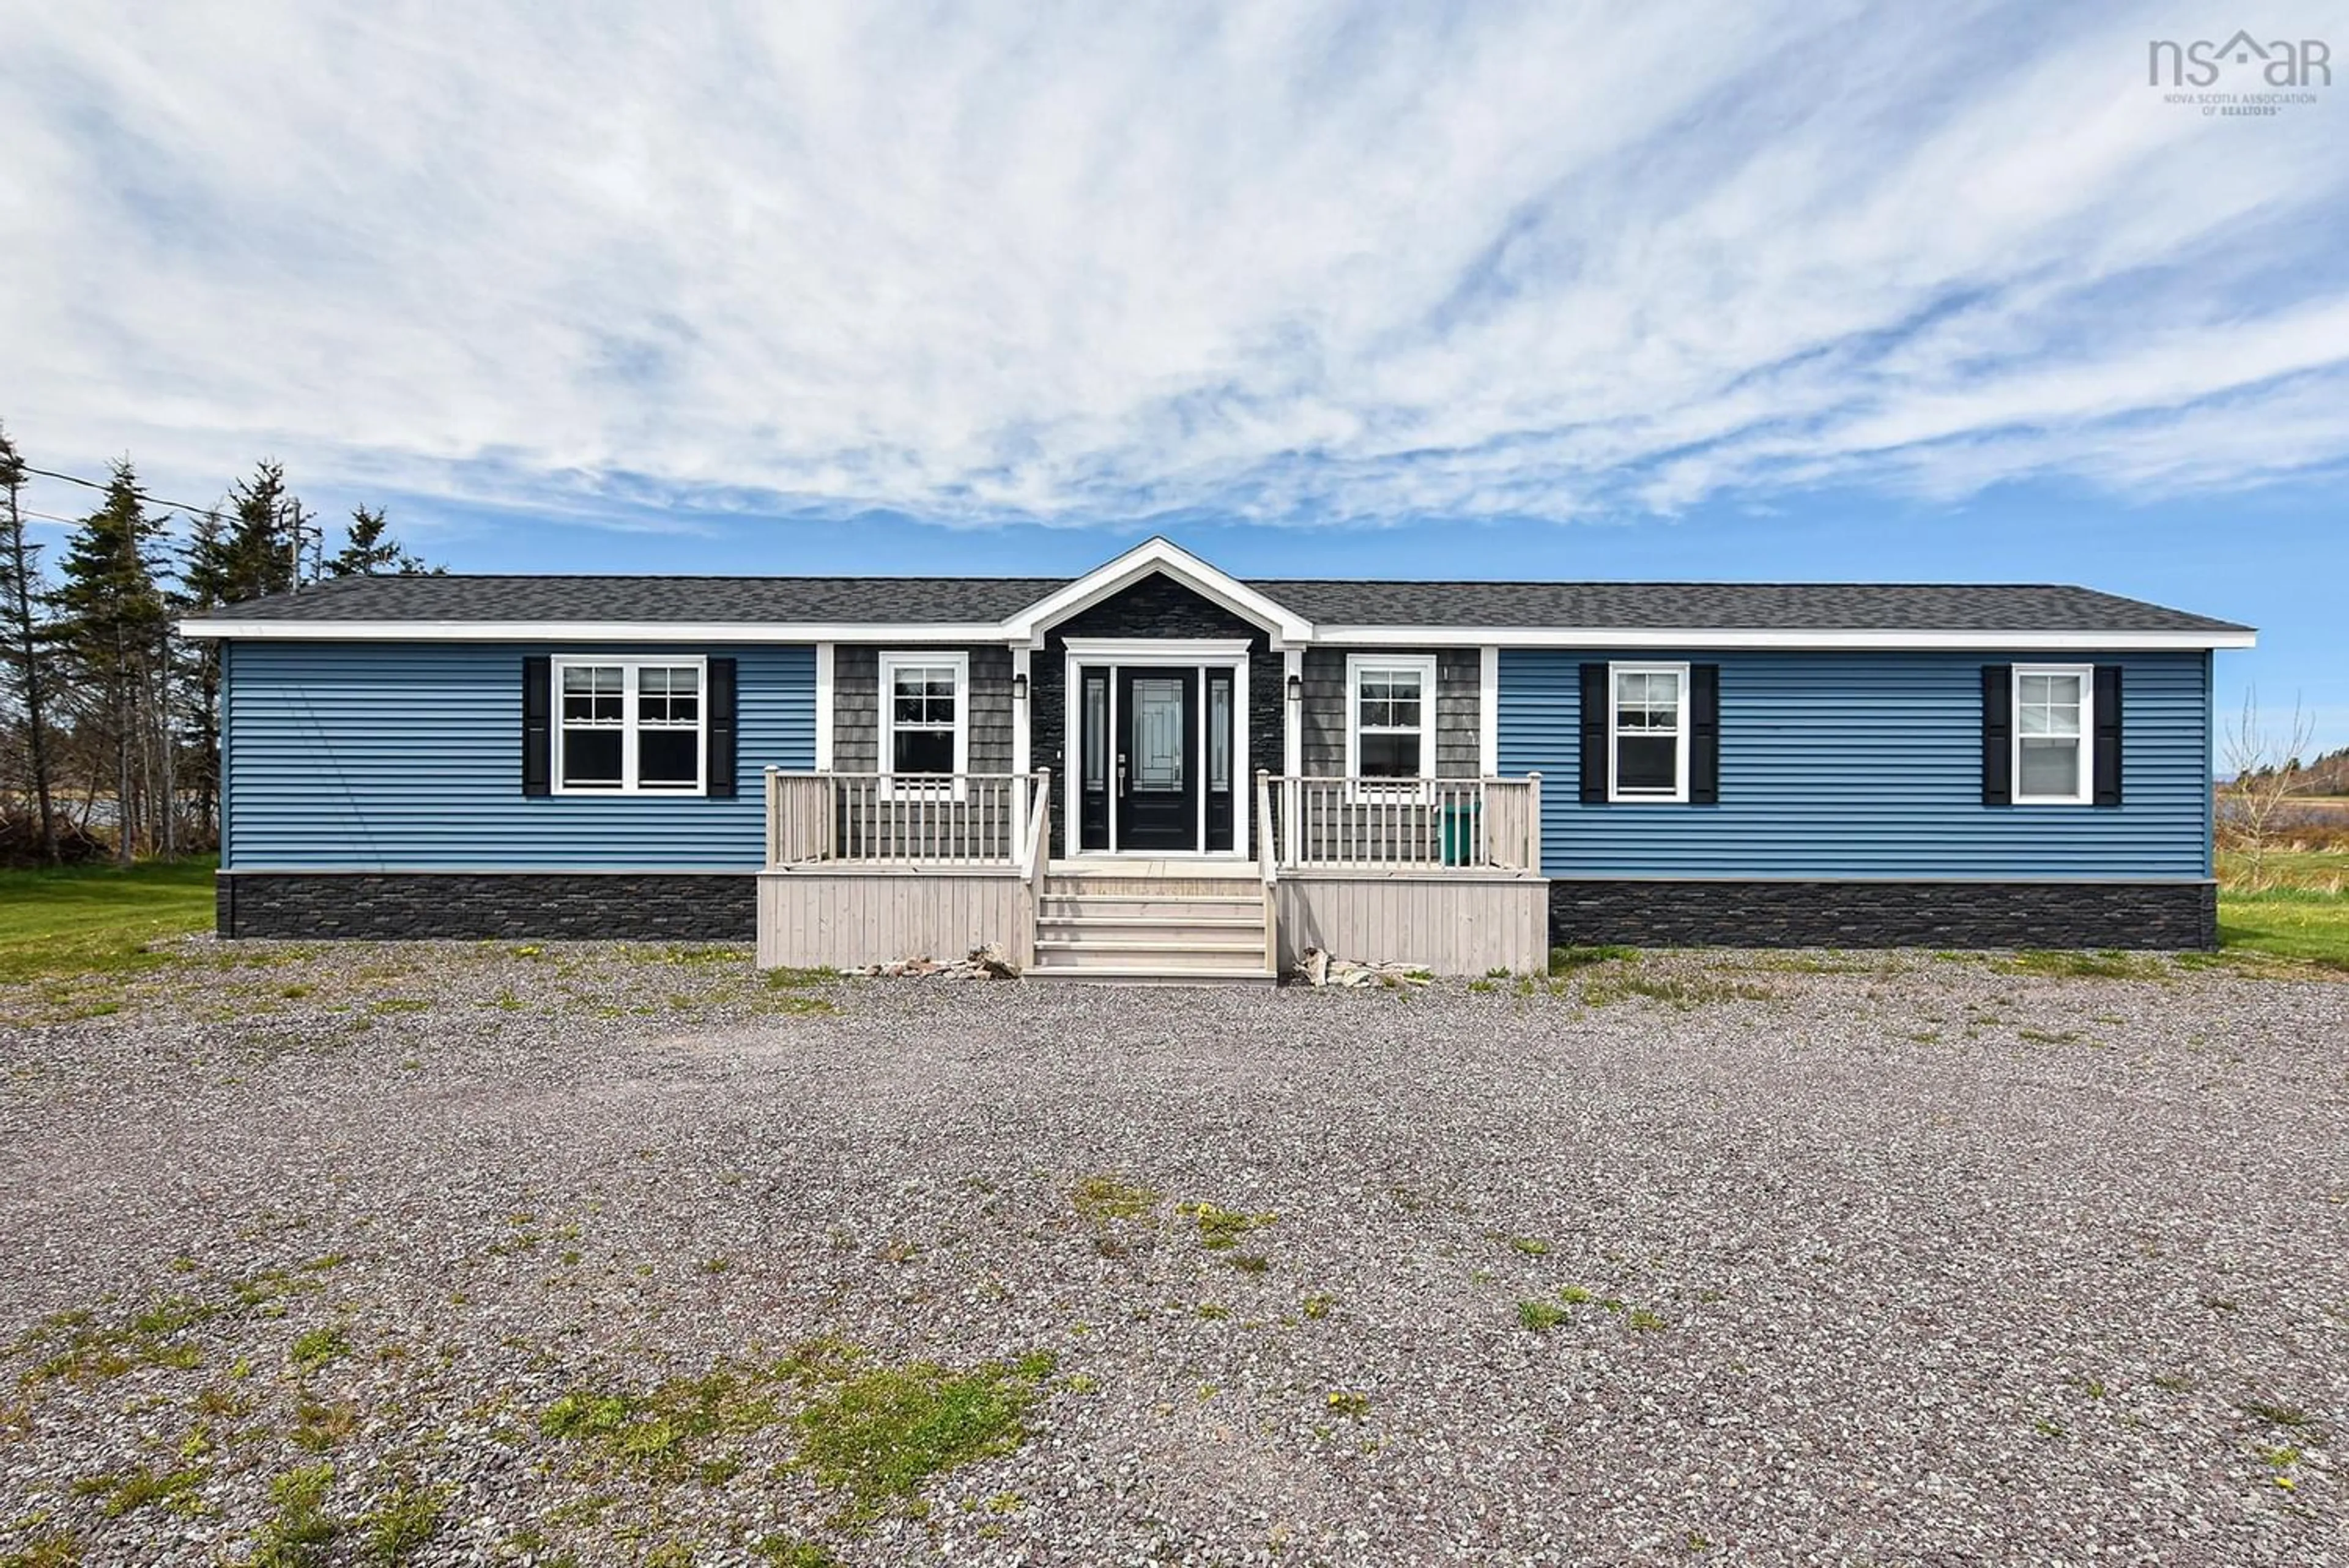 Home with vinyl exterior material for 367 Myette Rd, Tracadie Nova Scotia B0H 1A0